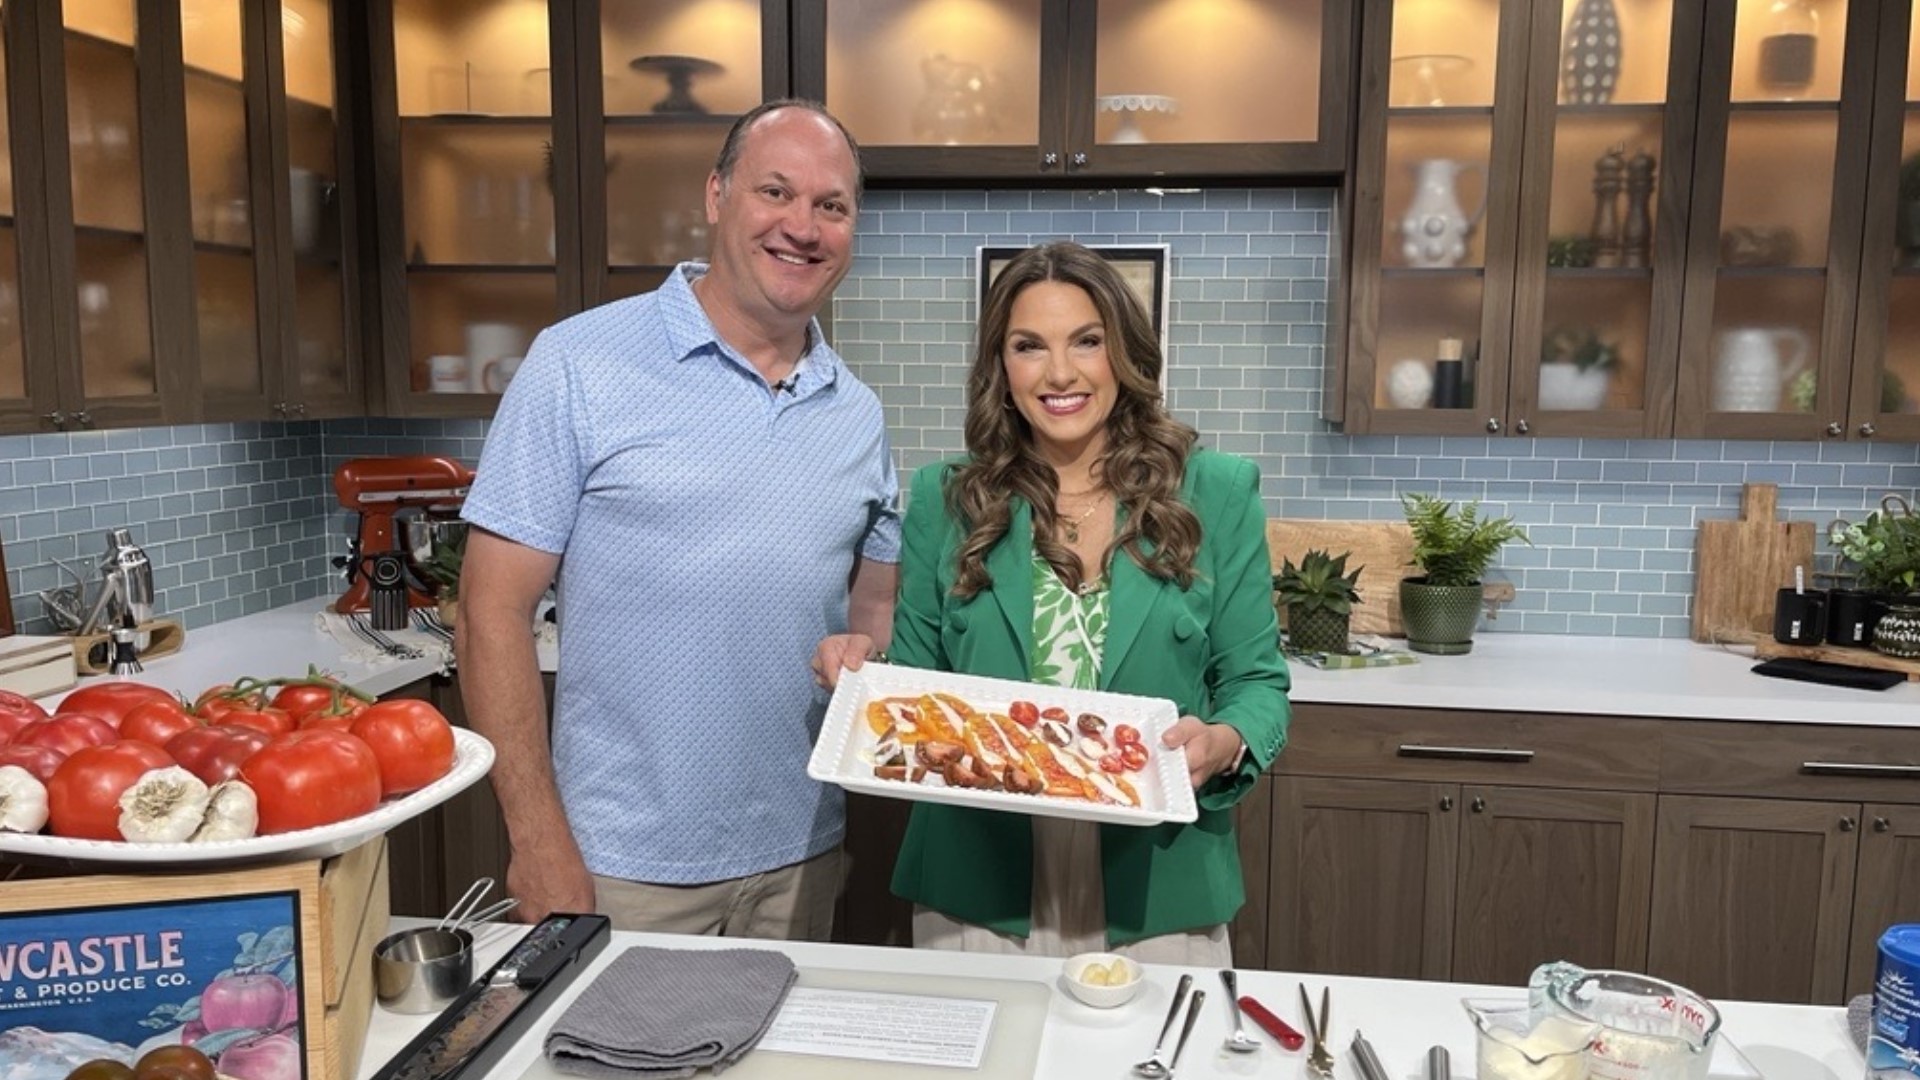 Culinary author James Fraioli shares a no-heat cooking recipe that showcases summer tomatoes.